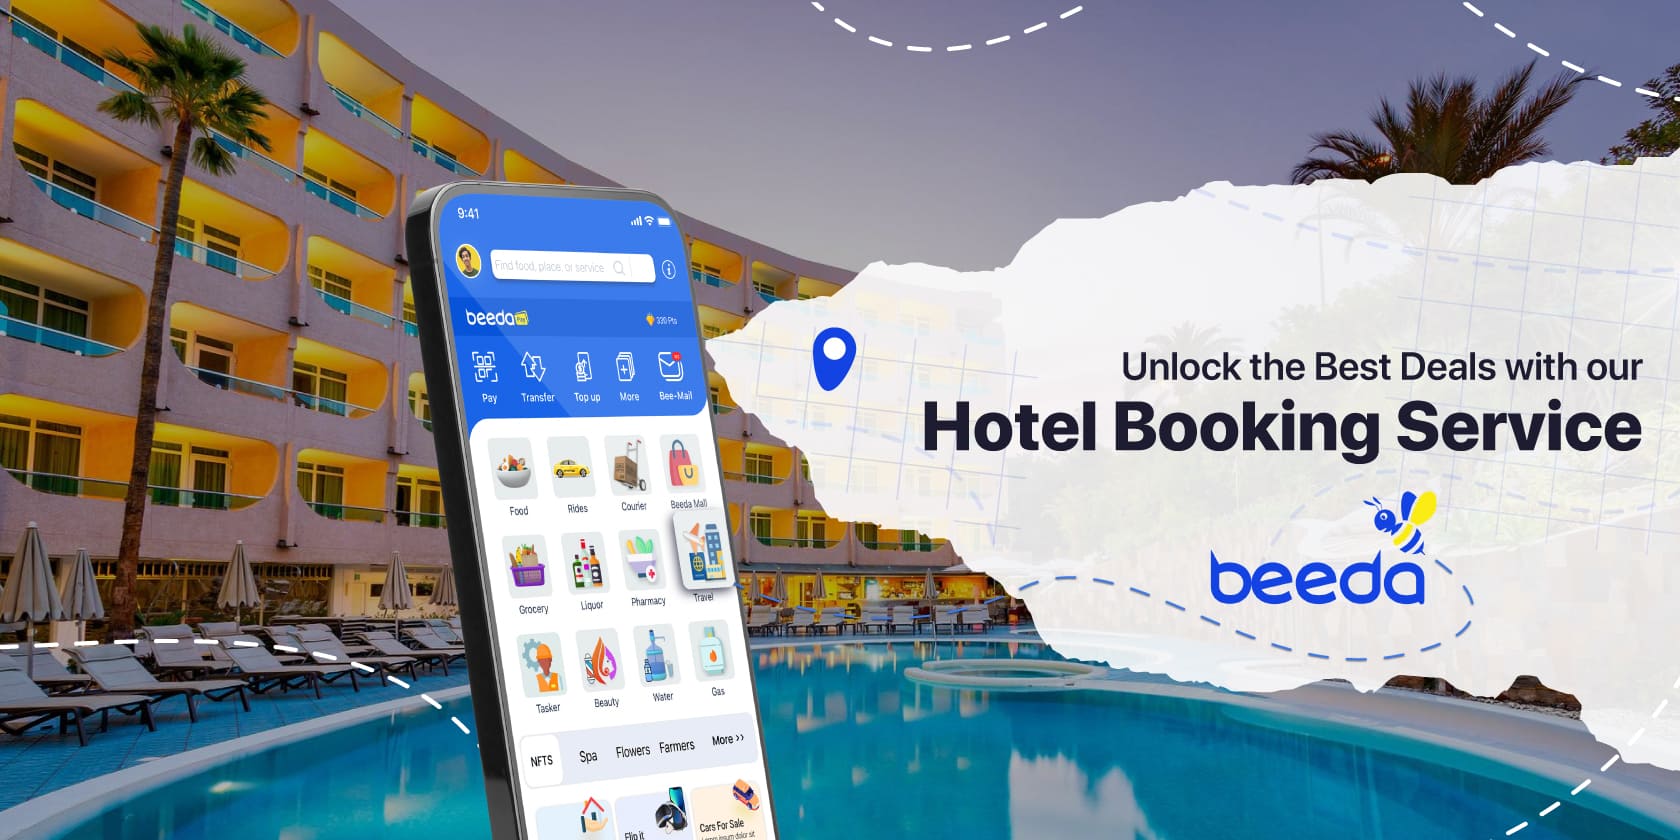 Hotel Booking Service Provider: 07 Things to Look For in 2023